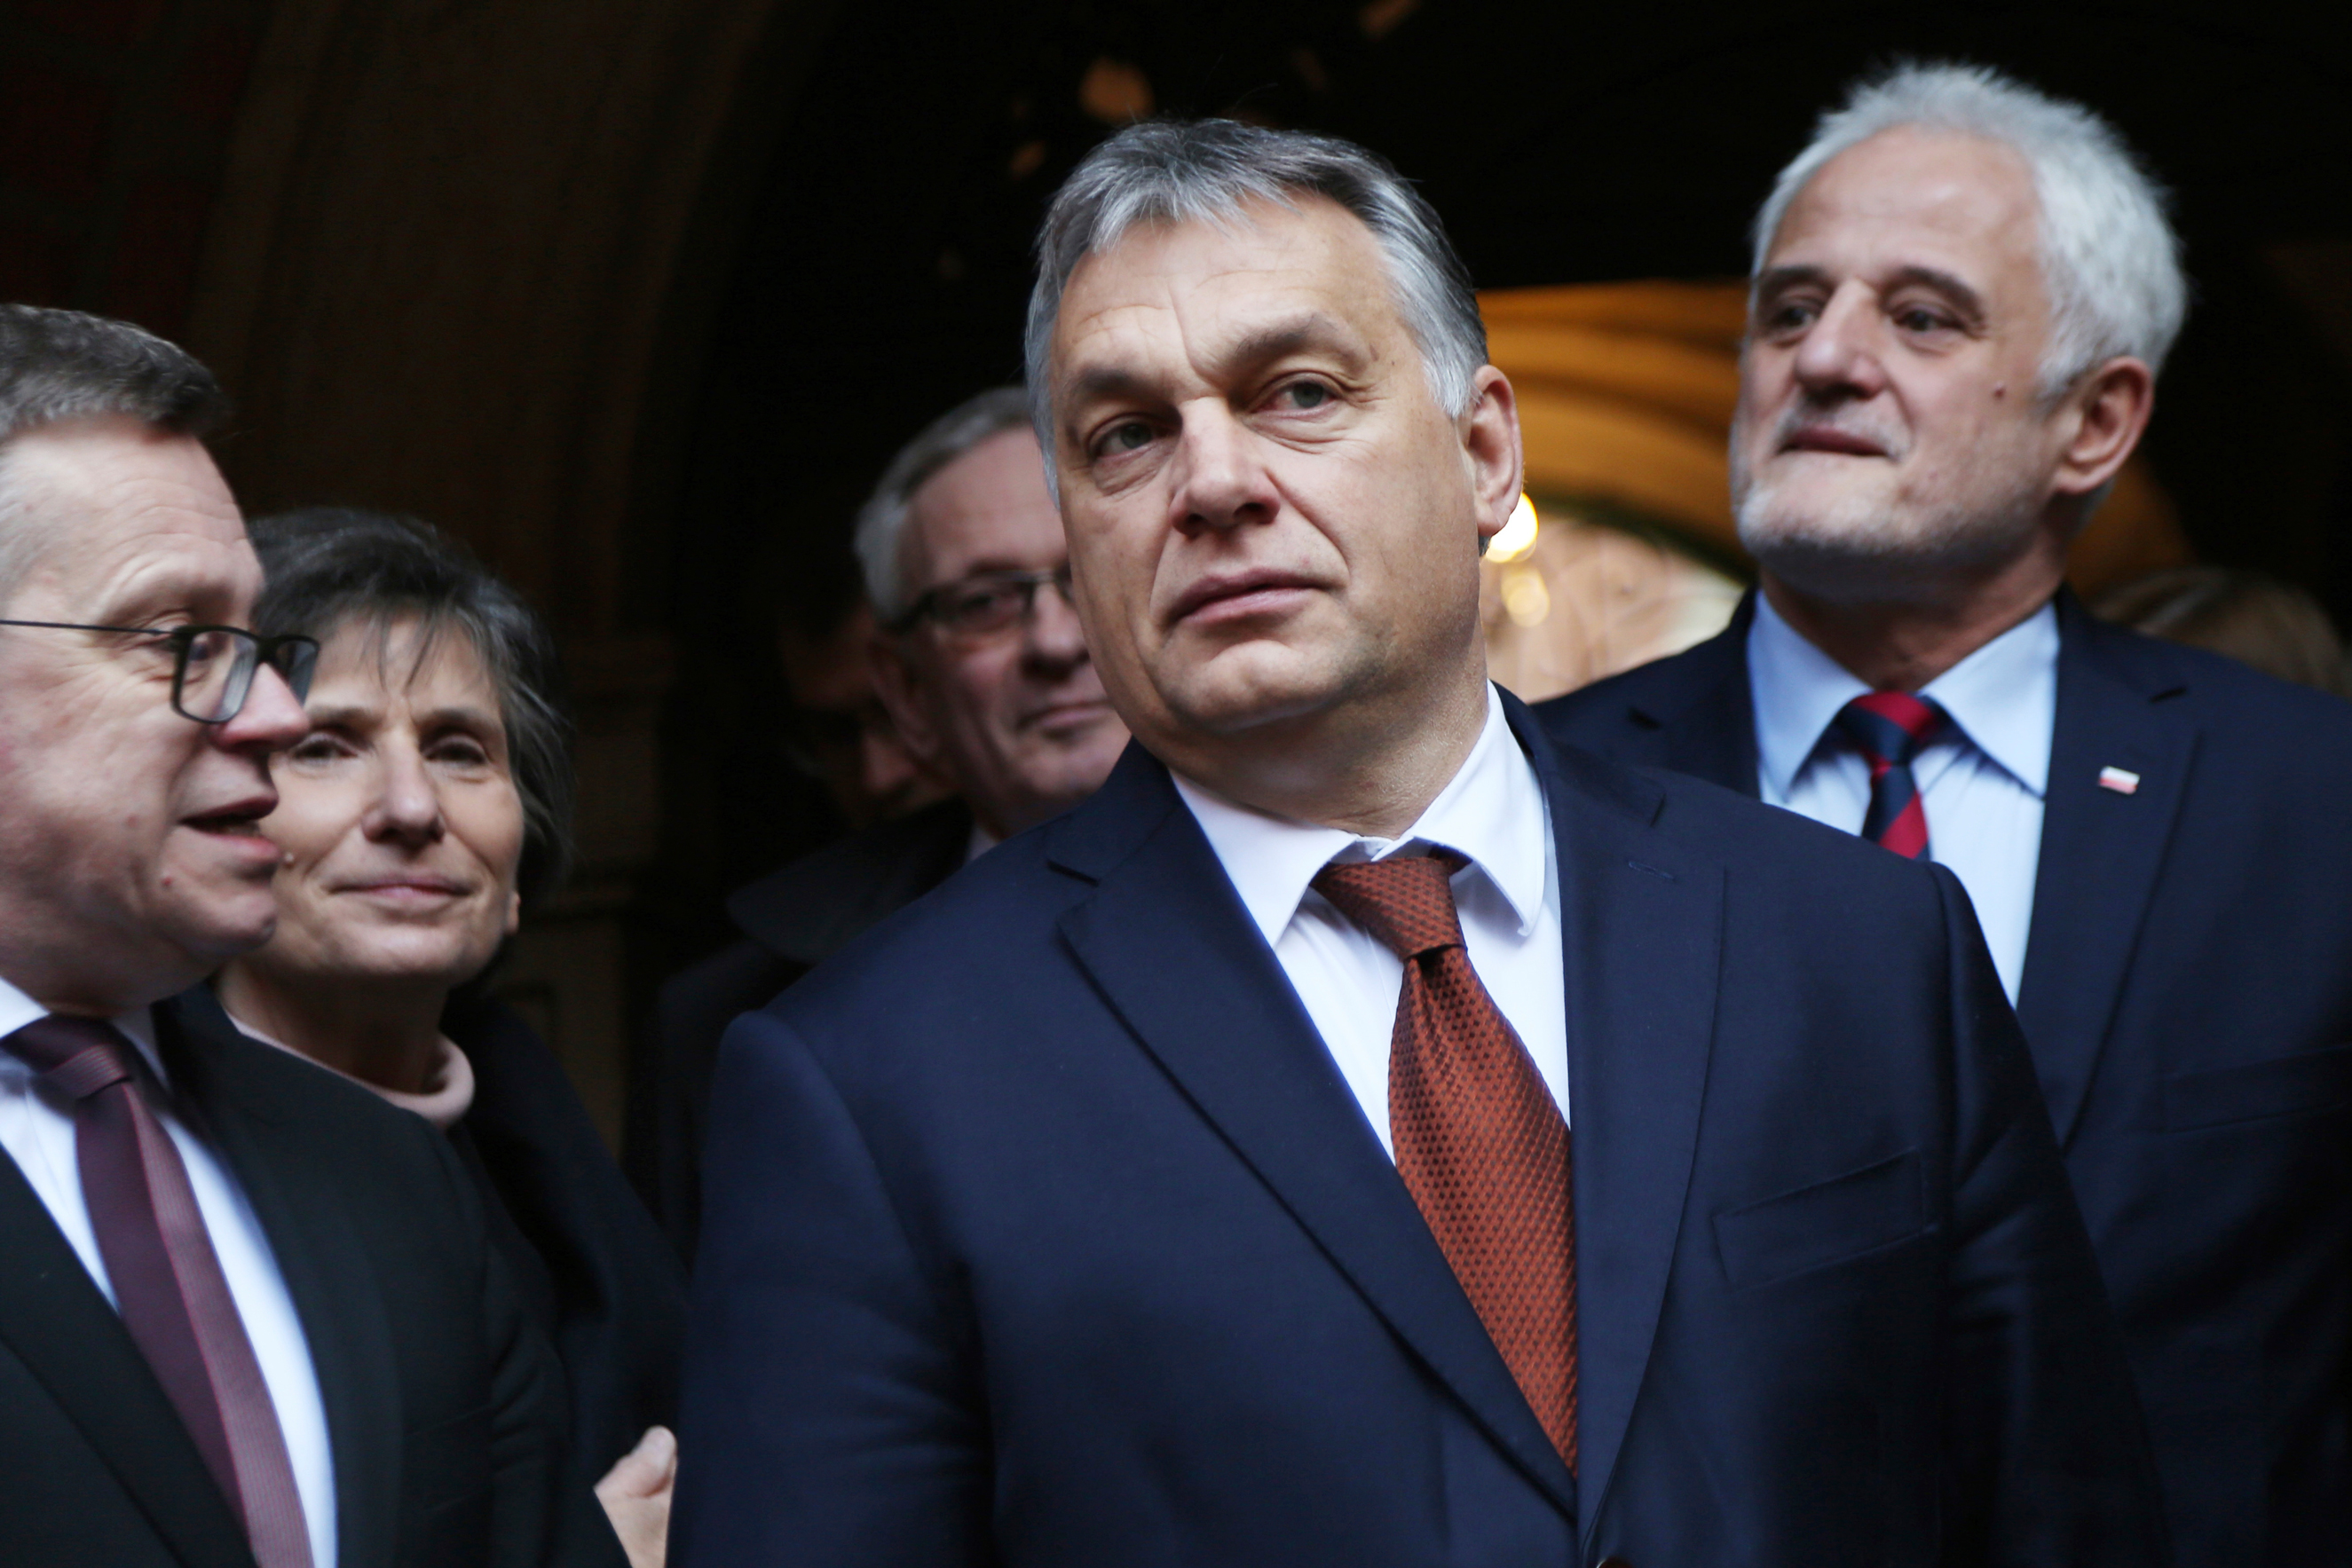 Prime Minister of Hungary, Viktor Orban, arrives at the scientific conference entitled "Europa Centralis - History of the Region Throughout the Ages" which was organized by the Jagiellonian University in Krakow, Poland to mark the one hundredth anniversary of the birth of the Polish professor of history Waclaw Felczak on Dec. 9, 2016. (Sipa USA/AP)